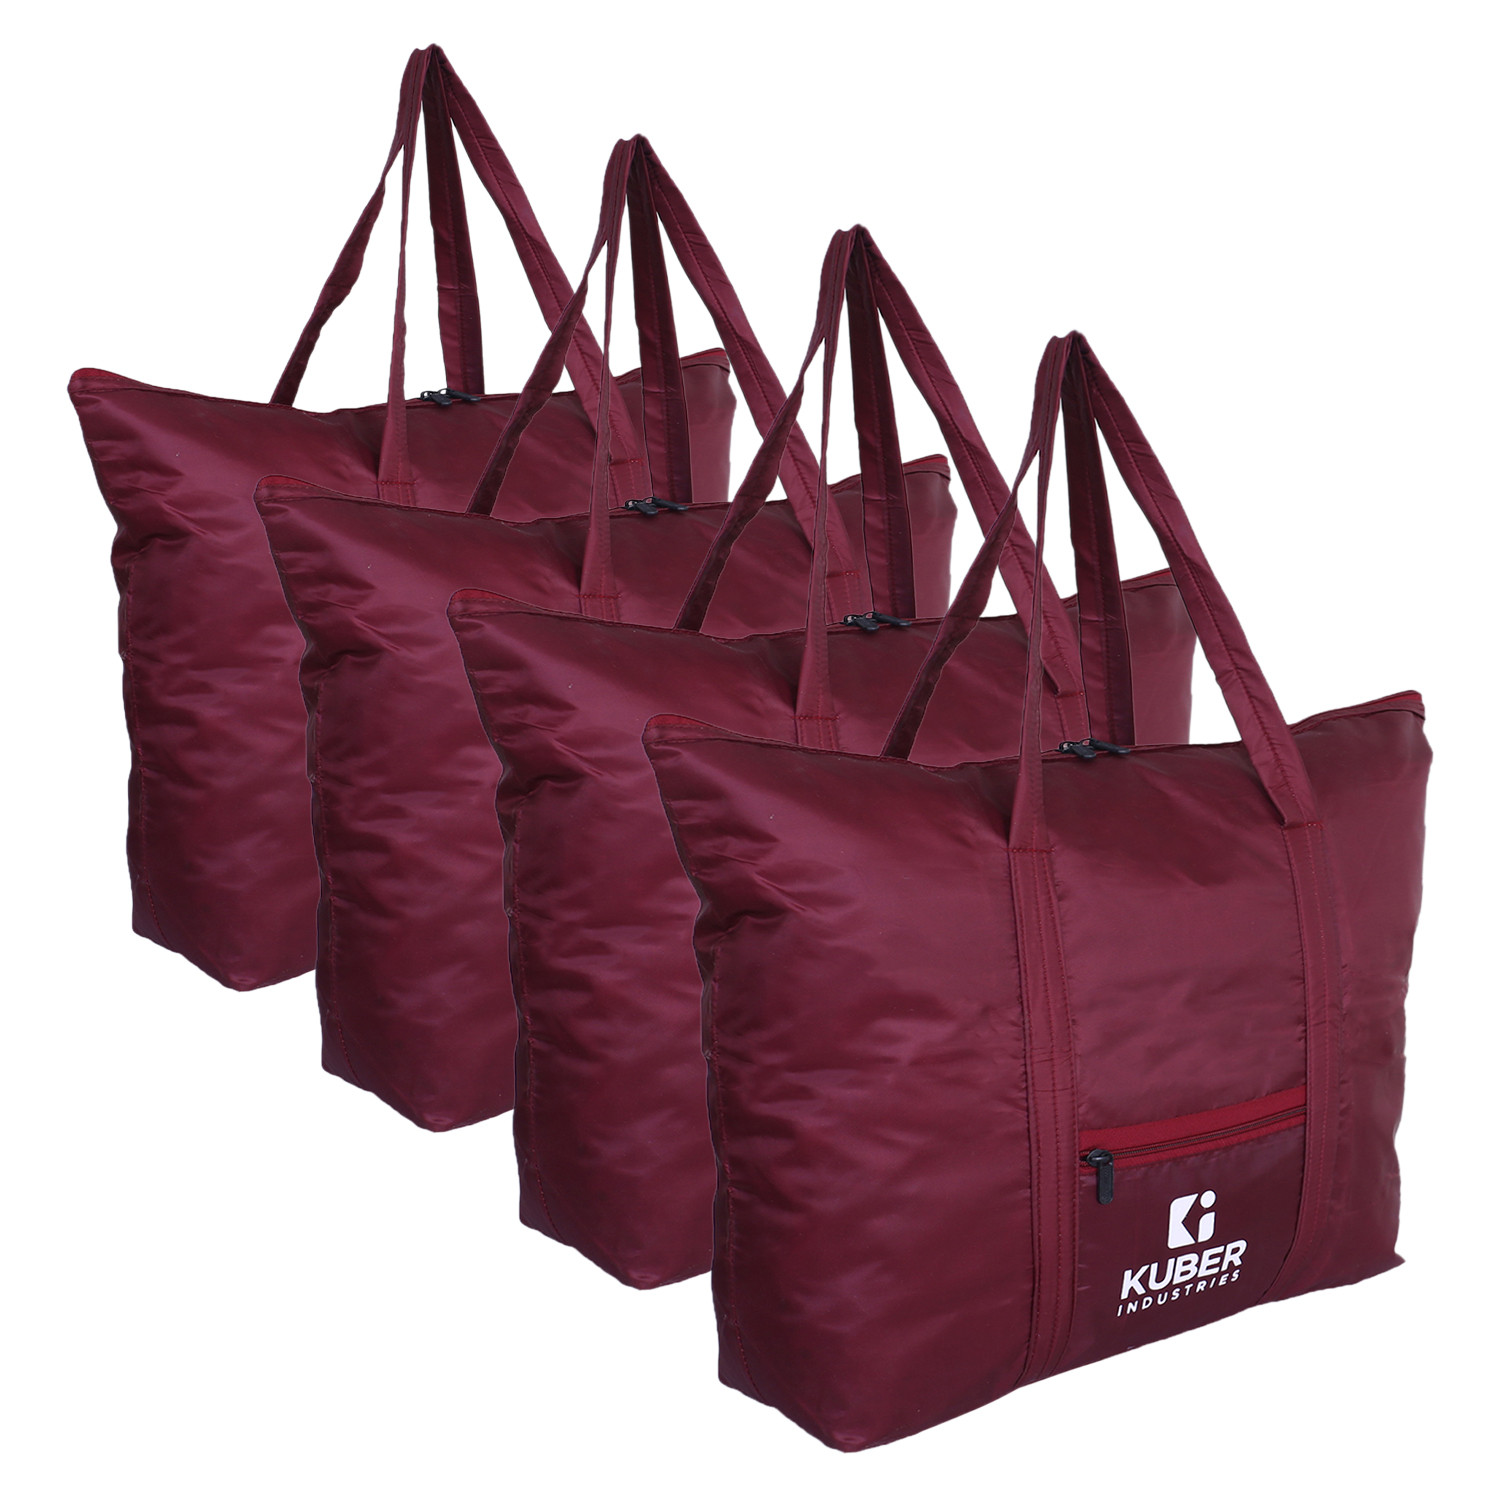 Kuber Industries Shopping Bag|Folding Travel Bag|Polyester Shopping Bag for Grocery|Carrying Bag With Front Small Pocket (Maroon)